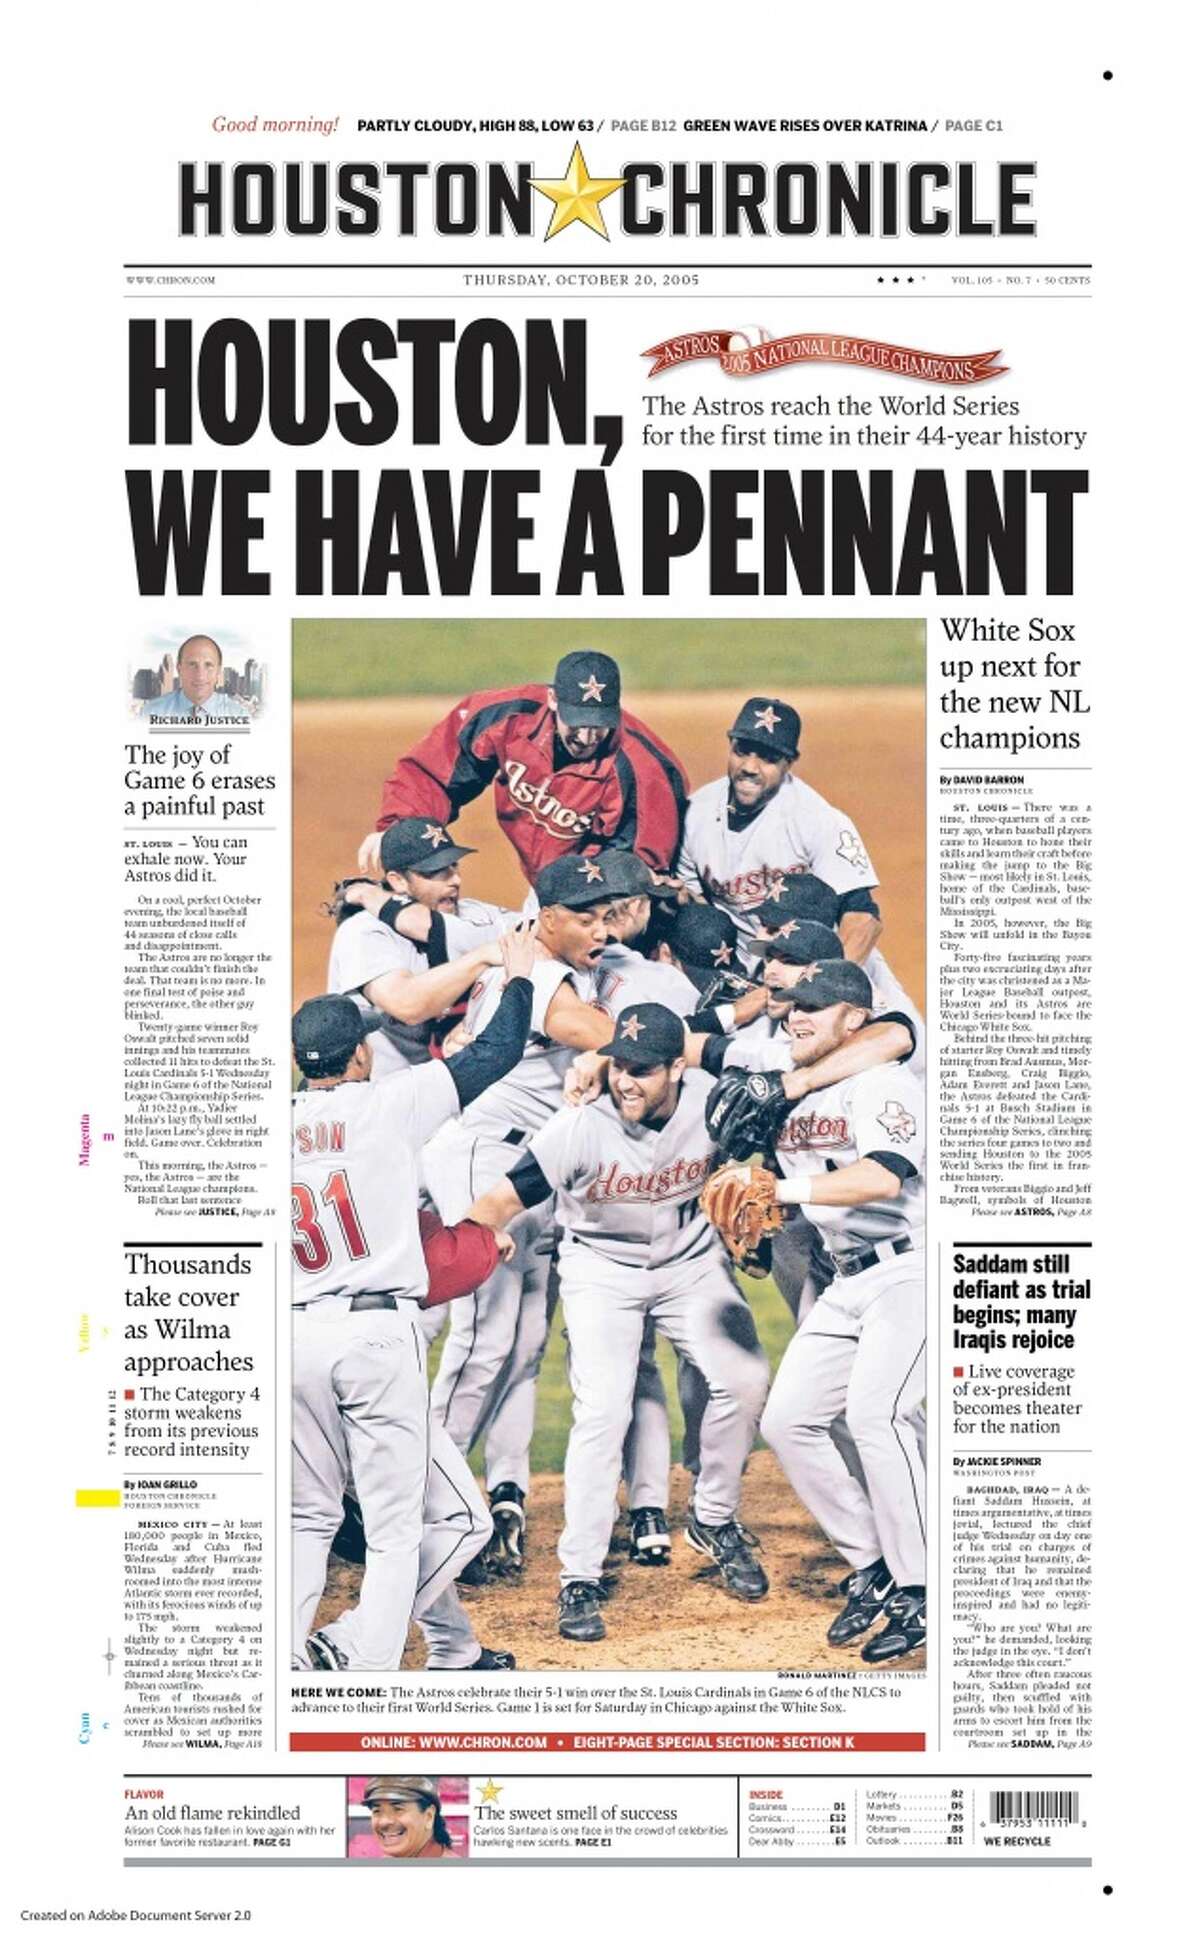 Here's the front page of the Houston Chronicle from the day the Astros clinched the 2005 NLCS and earned a trip to the World Series.